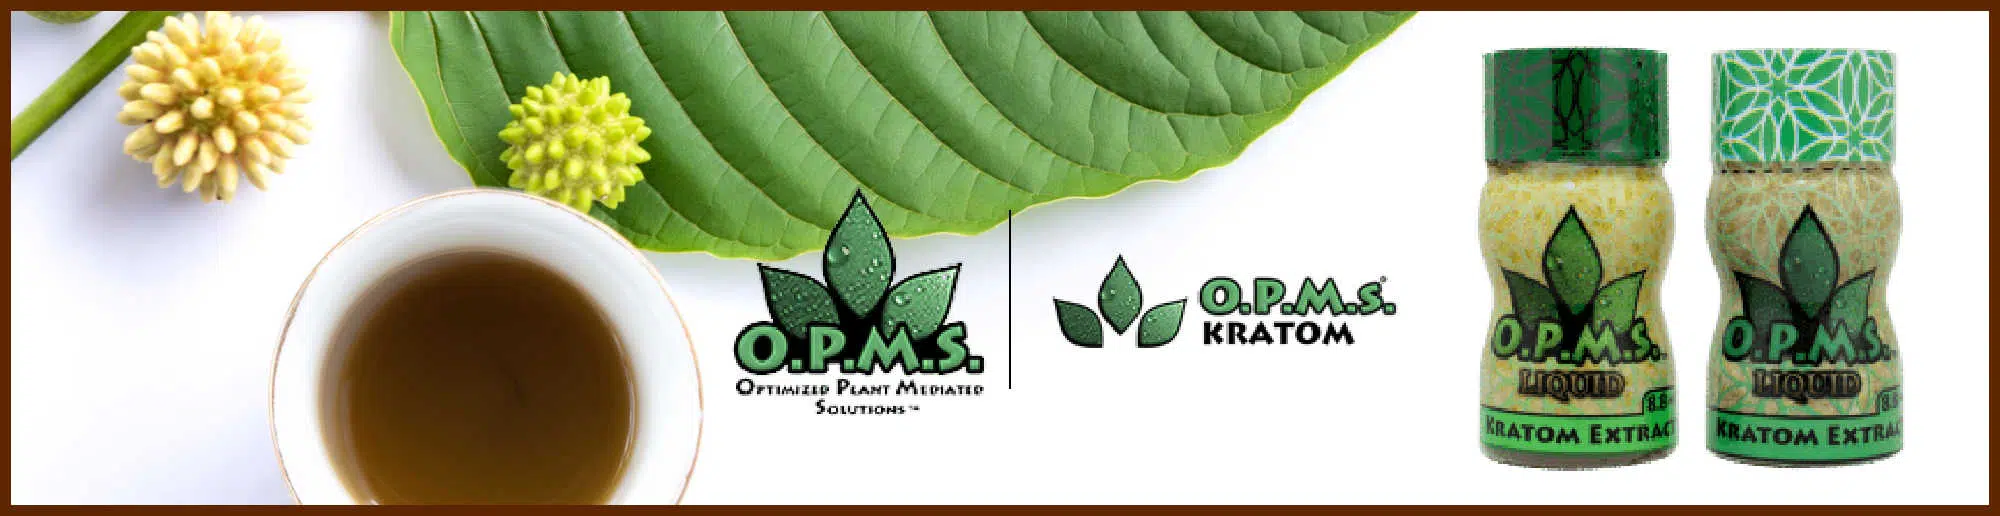 optimized plant mediated solutions logo and product banner